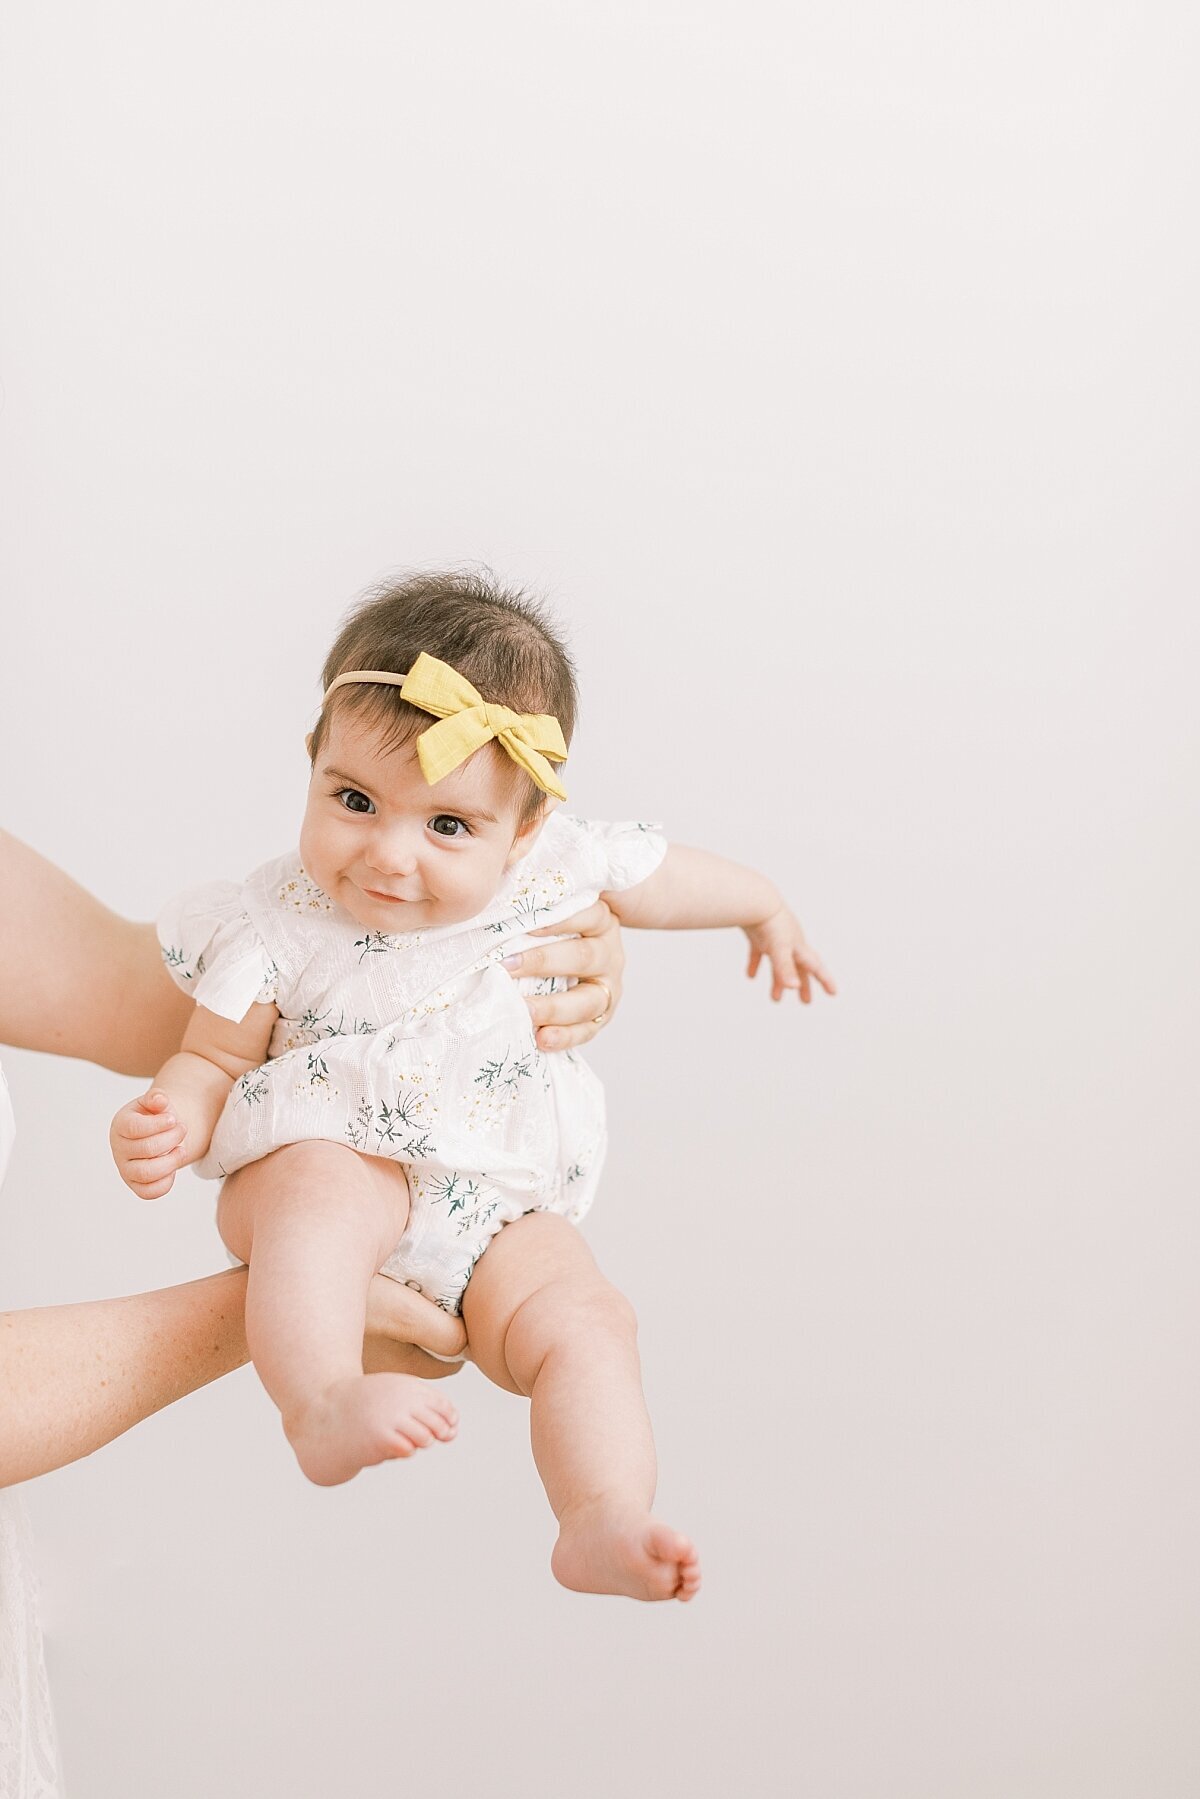 Rebecca Shivers Photography Lancaster lifestyle studio, Lancaster wedding photographer, Lancaster maternity photography, Lancaster newborn Photography, Lancaster family photographs, fine art photography